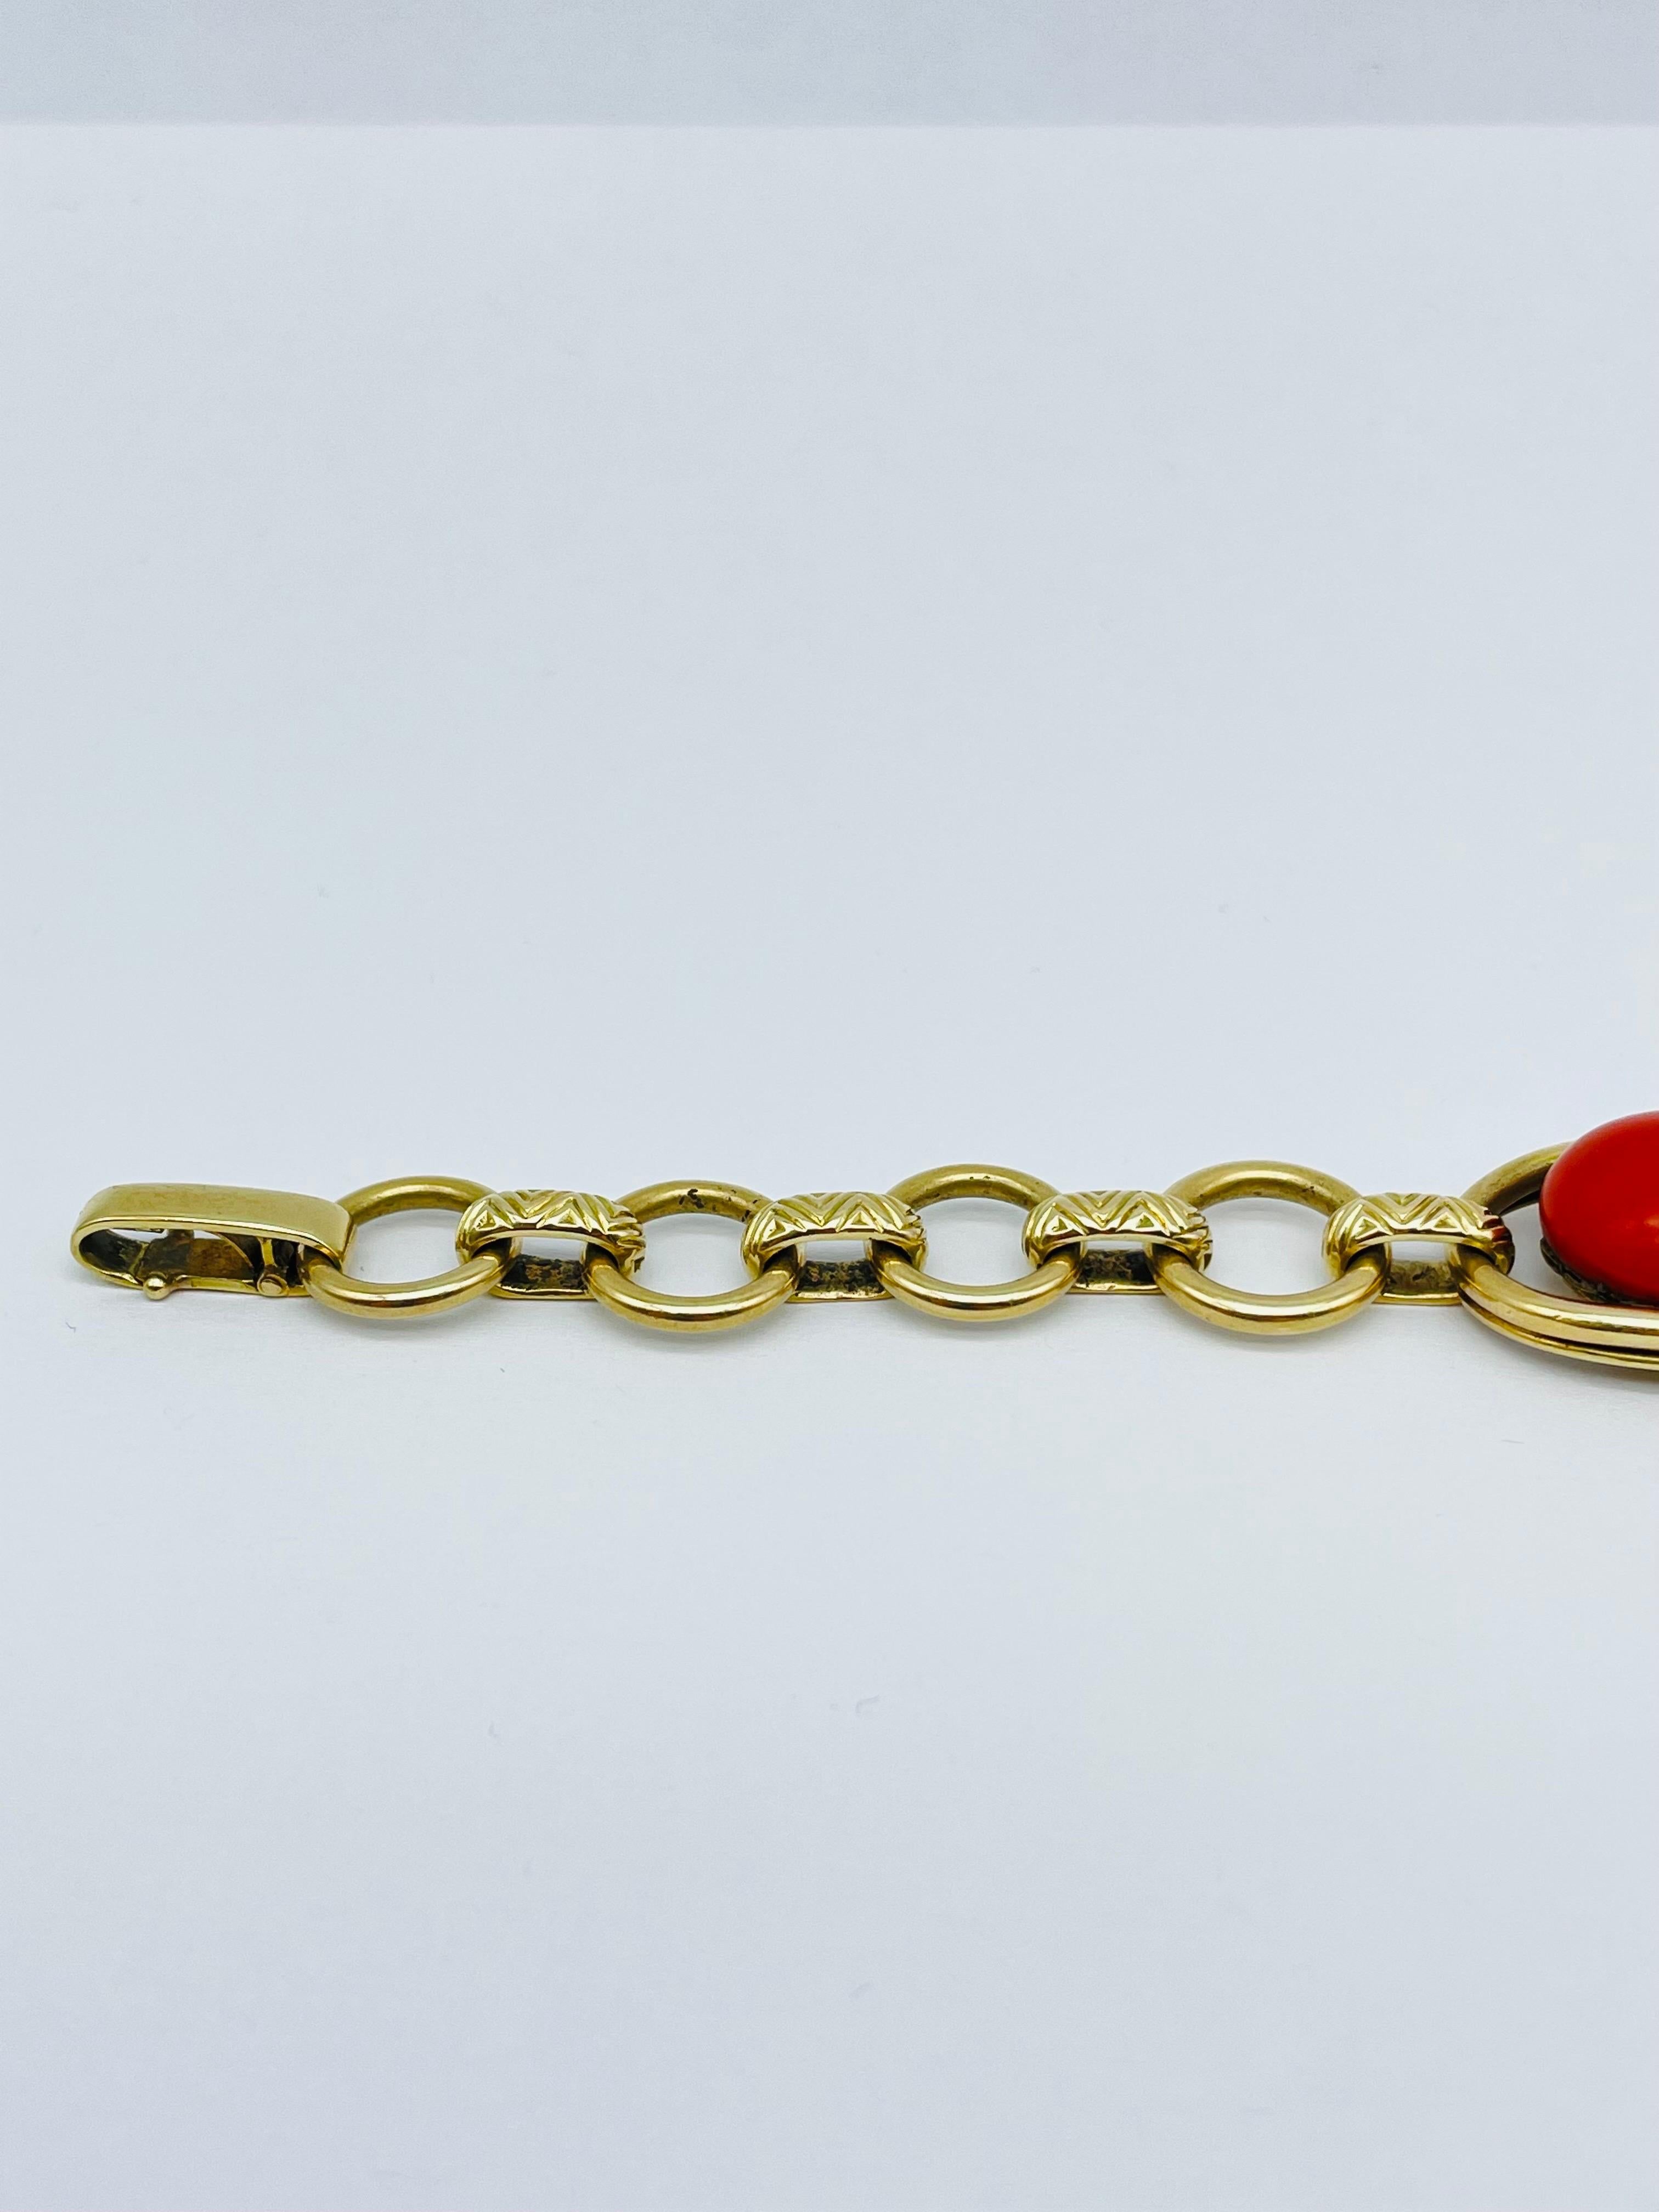 Women's or Men's Exceptional Bracelet 14k Gold Link Chain Red Coral For Sale